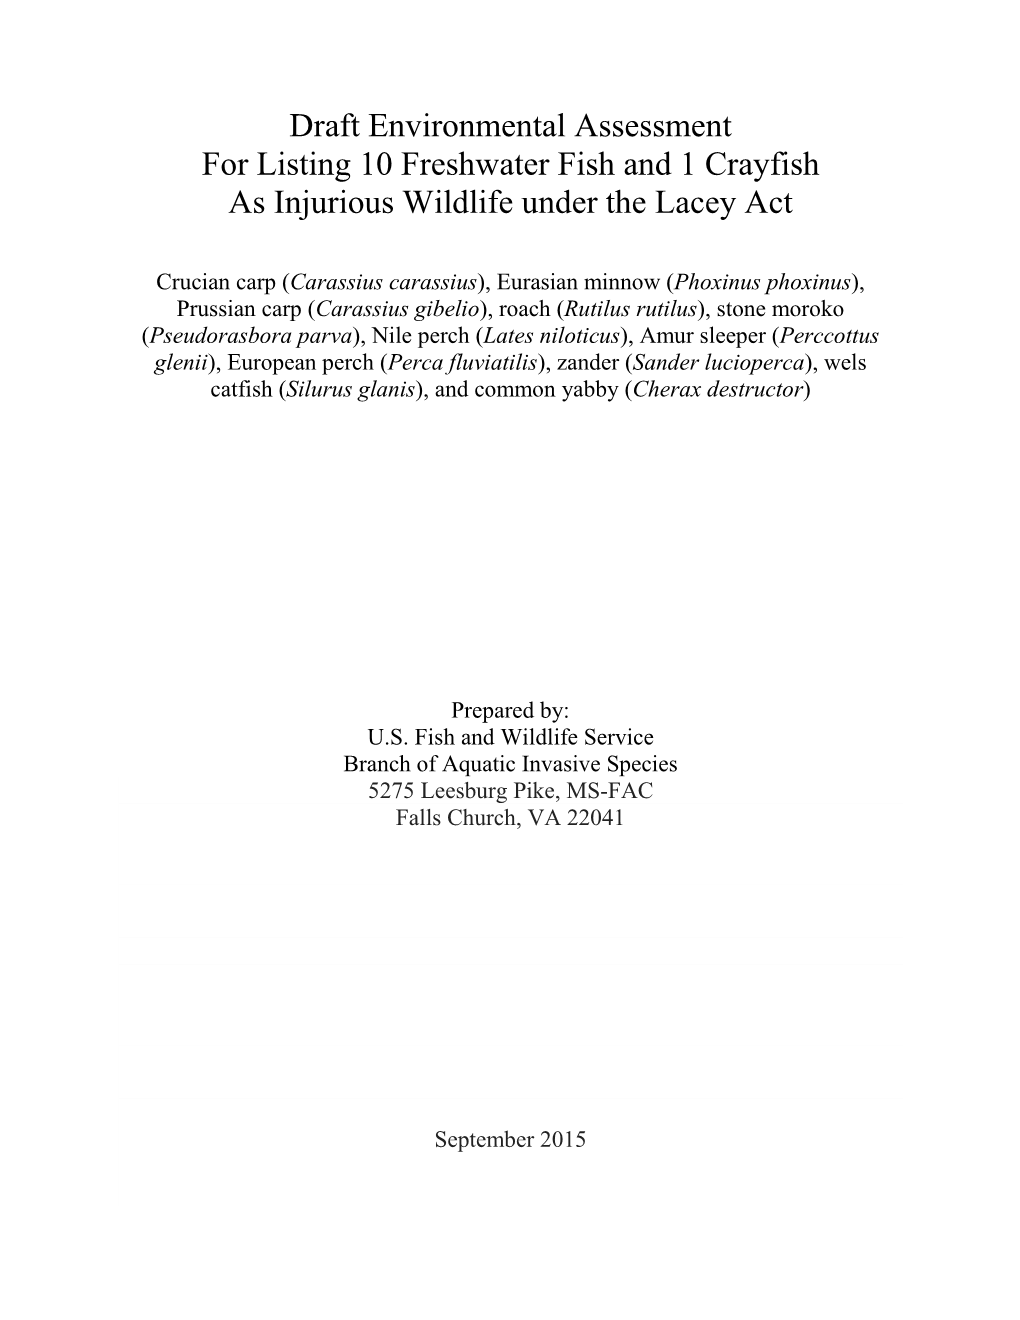 Draft Environmental Assessment for Listing 10 Freshwater Fish and 1 Crayfish As Injurious Wildlife Under the Lacey Act